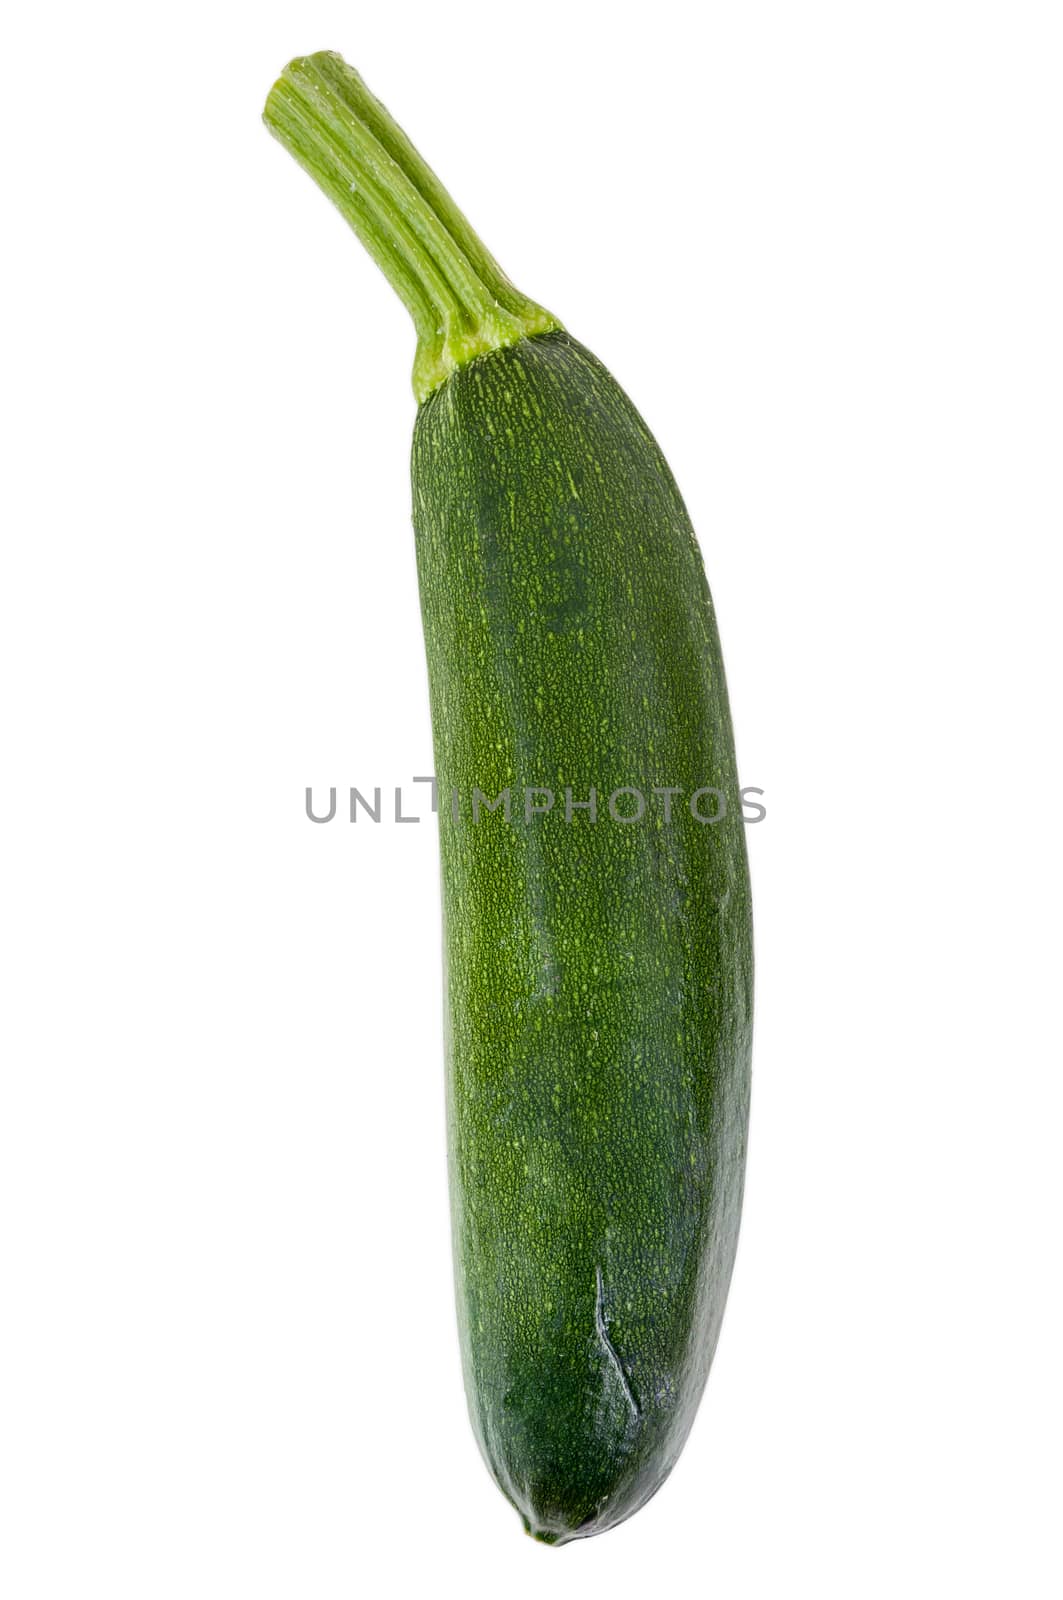 Single zucchini on white background by mkos83